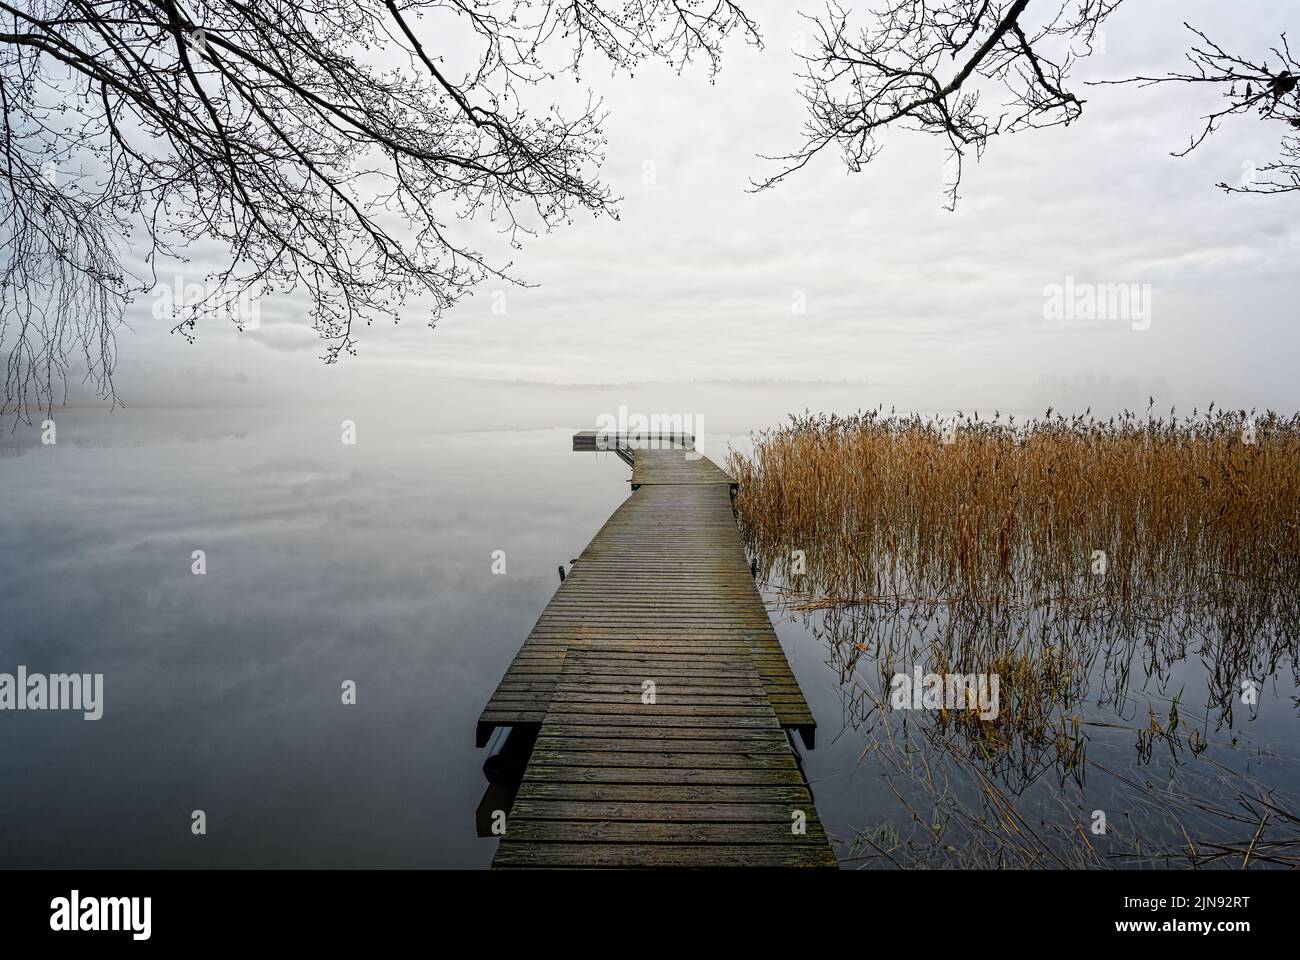 Misty morning with empty landscape and wooden pier Stock Photo - Alamy